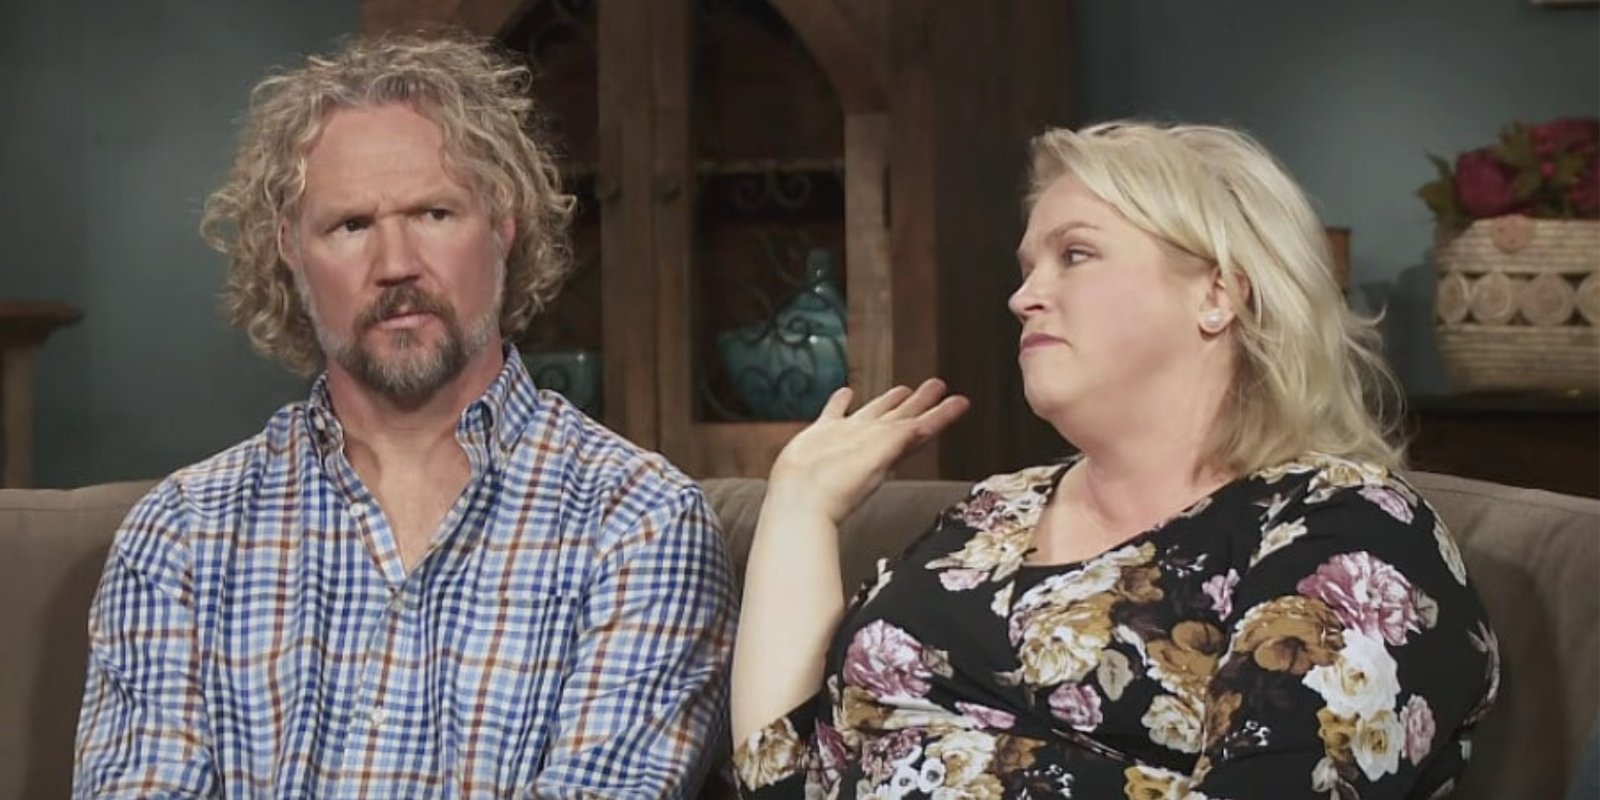 Irate ‘Sister Wives’ Fans List Janelle Brown’s ‘Sacrifices’ for Kody Brown After He Won’t Give up His ‘Lifestyle’ to Live in Her RV